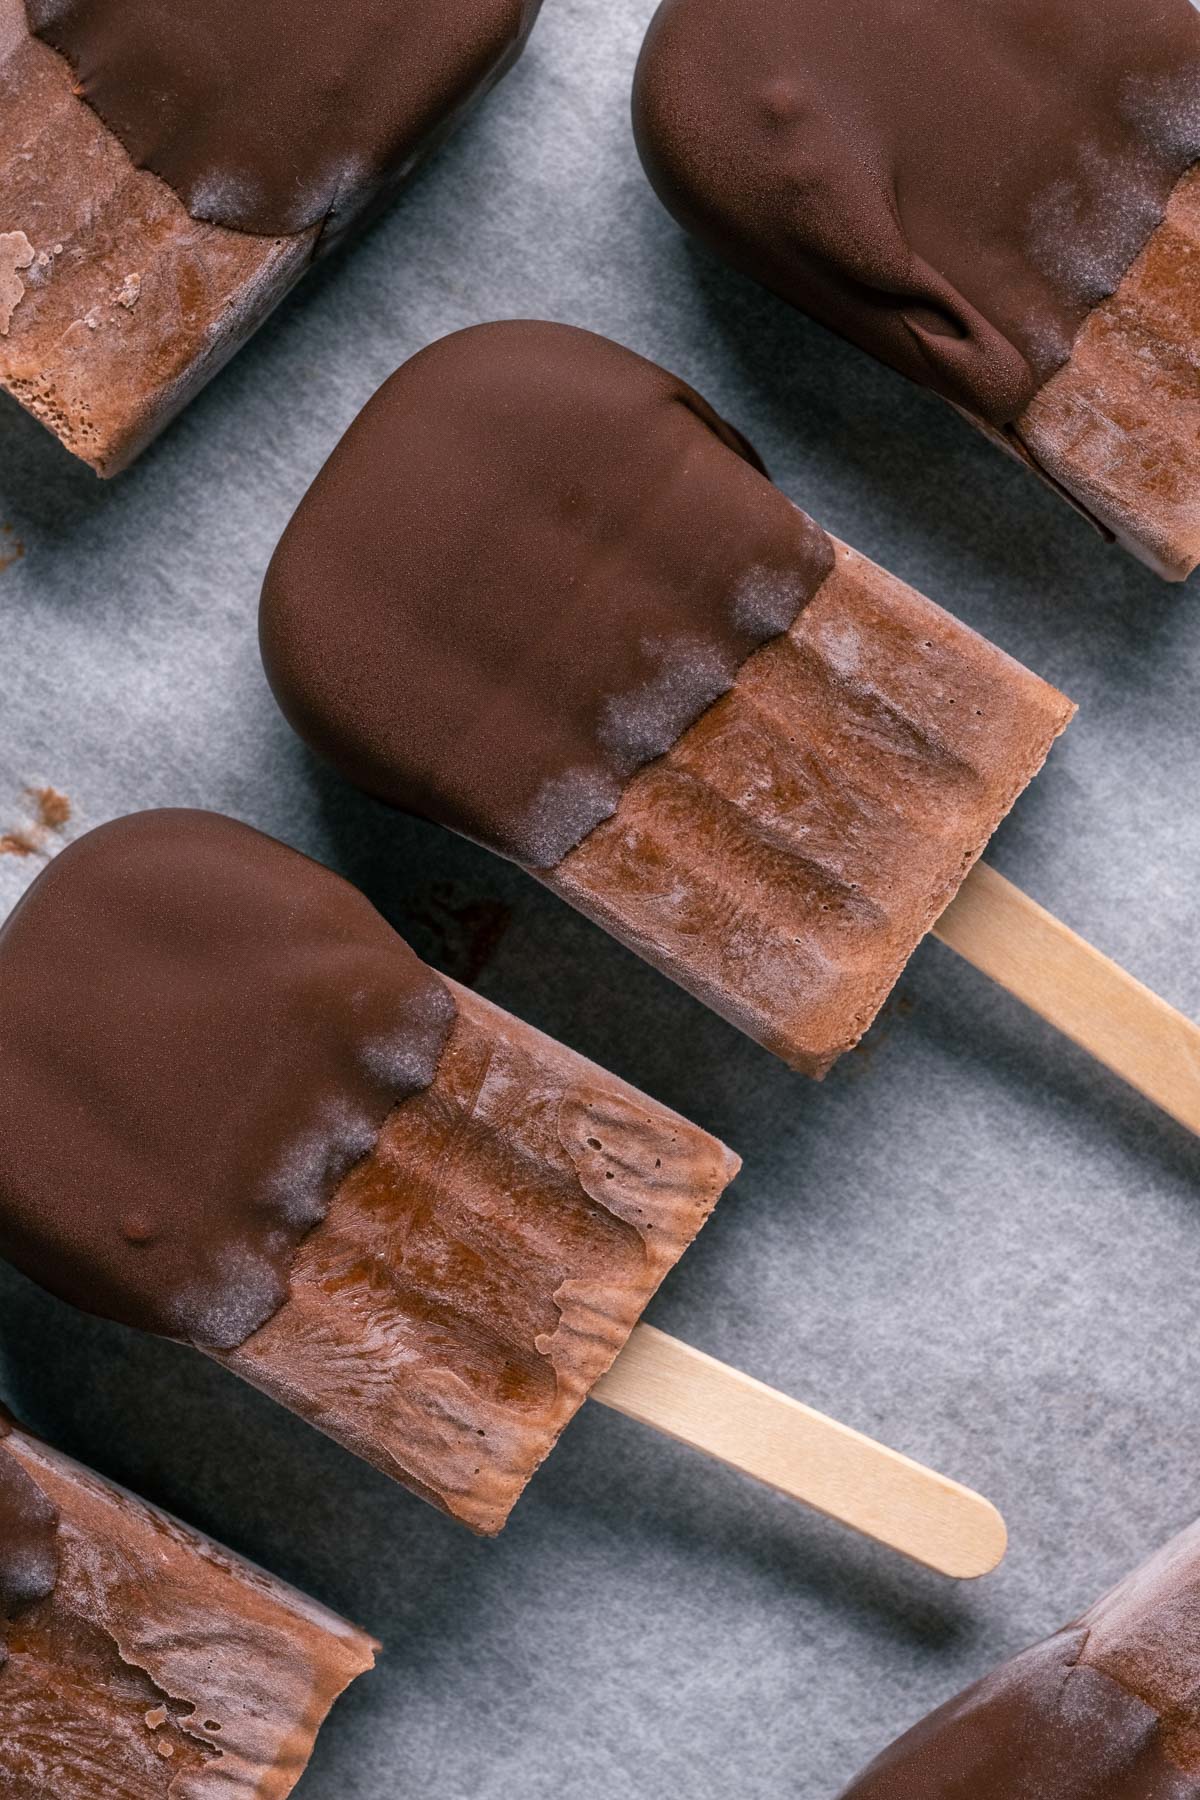 Chocolate dipped popsicles on a parchment lined tray.